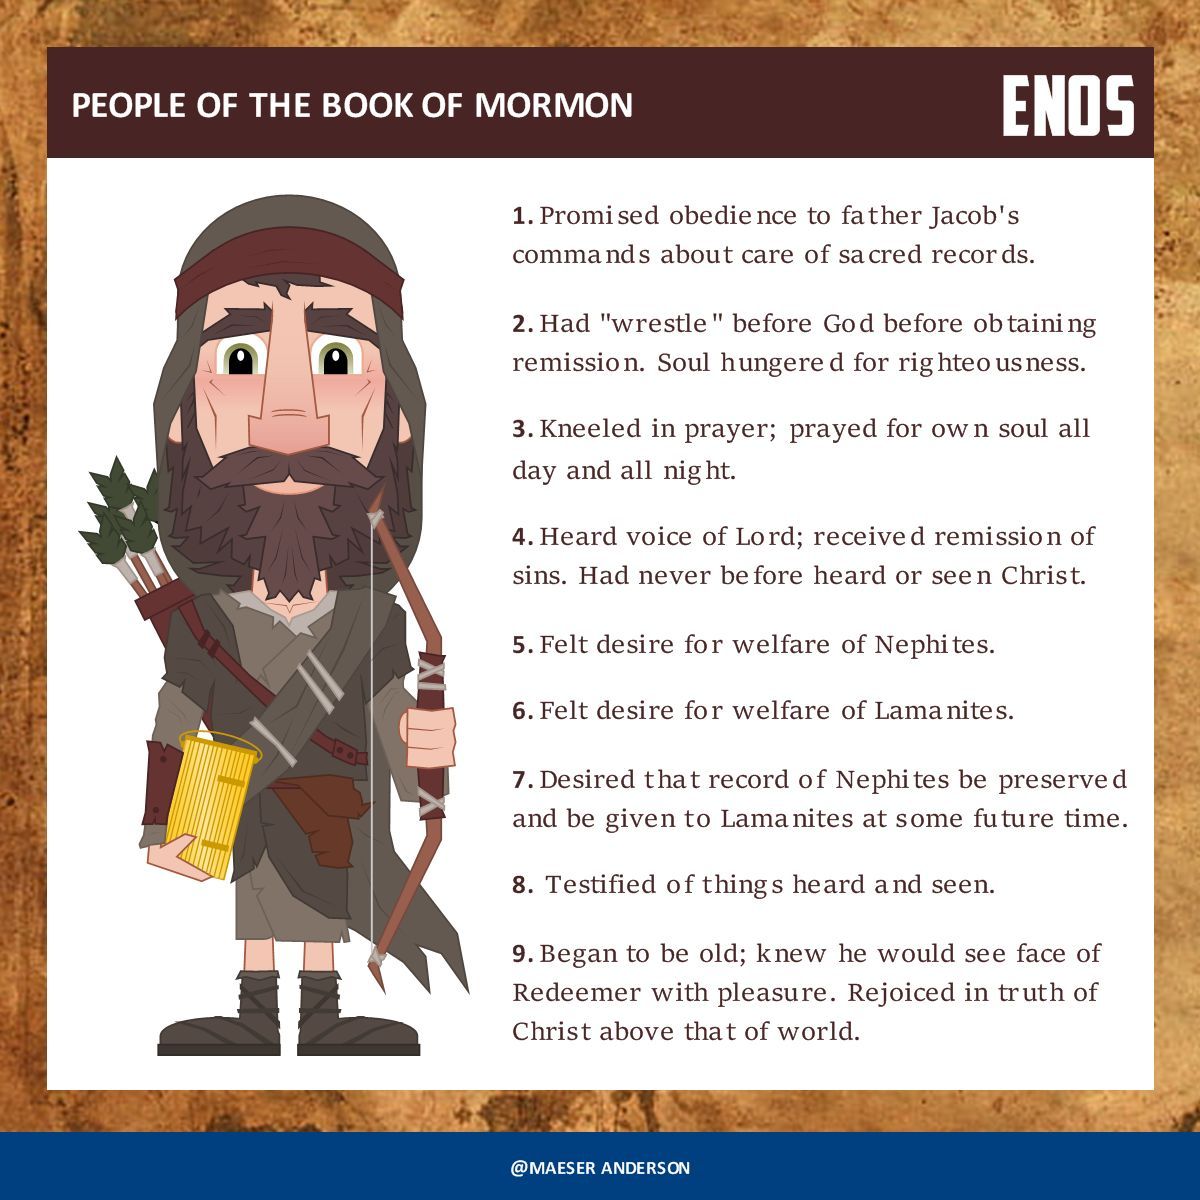 People of the Book of Mormon: Enos
------
#GeneralConference #ldsconf #JesusChrist #sharegoodness #lds #bookofmormon #comefollowme #strivetobe